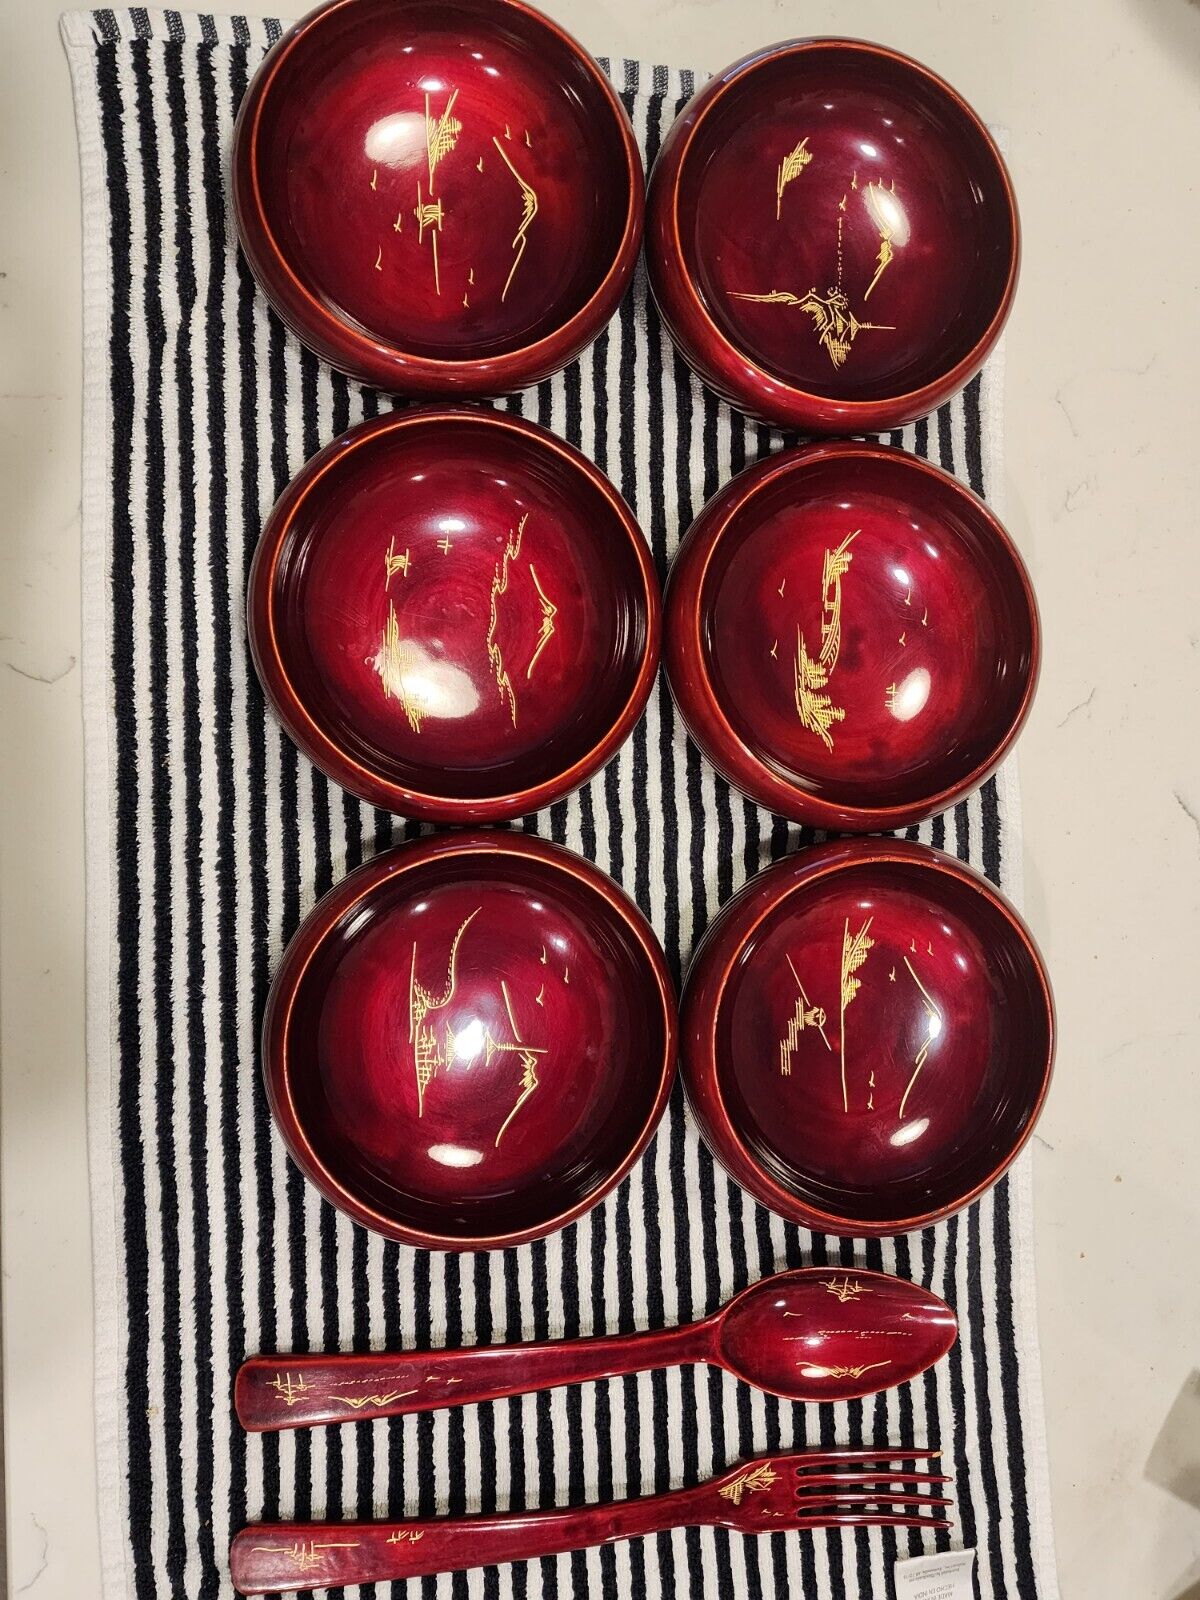 Vintage 9 PC Aizu Japanese Hand painted Salad Bowl Set Red Lacquer Inlaid Shell